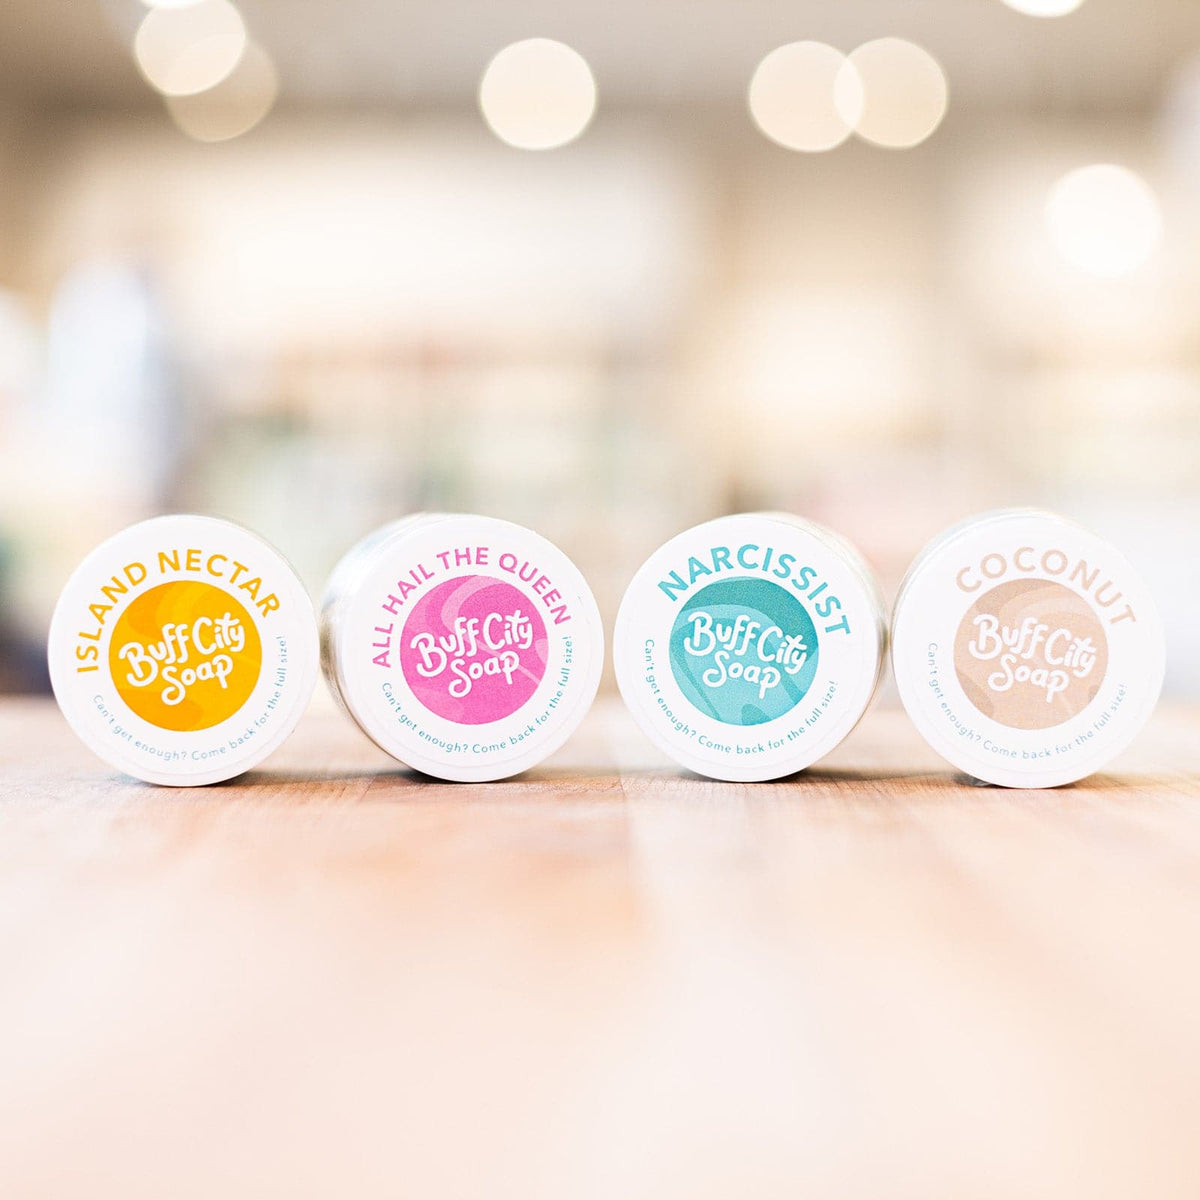 Body Butter Mini Collection